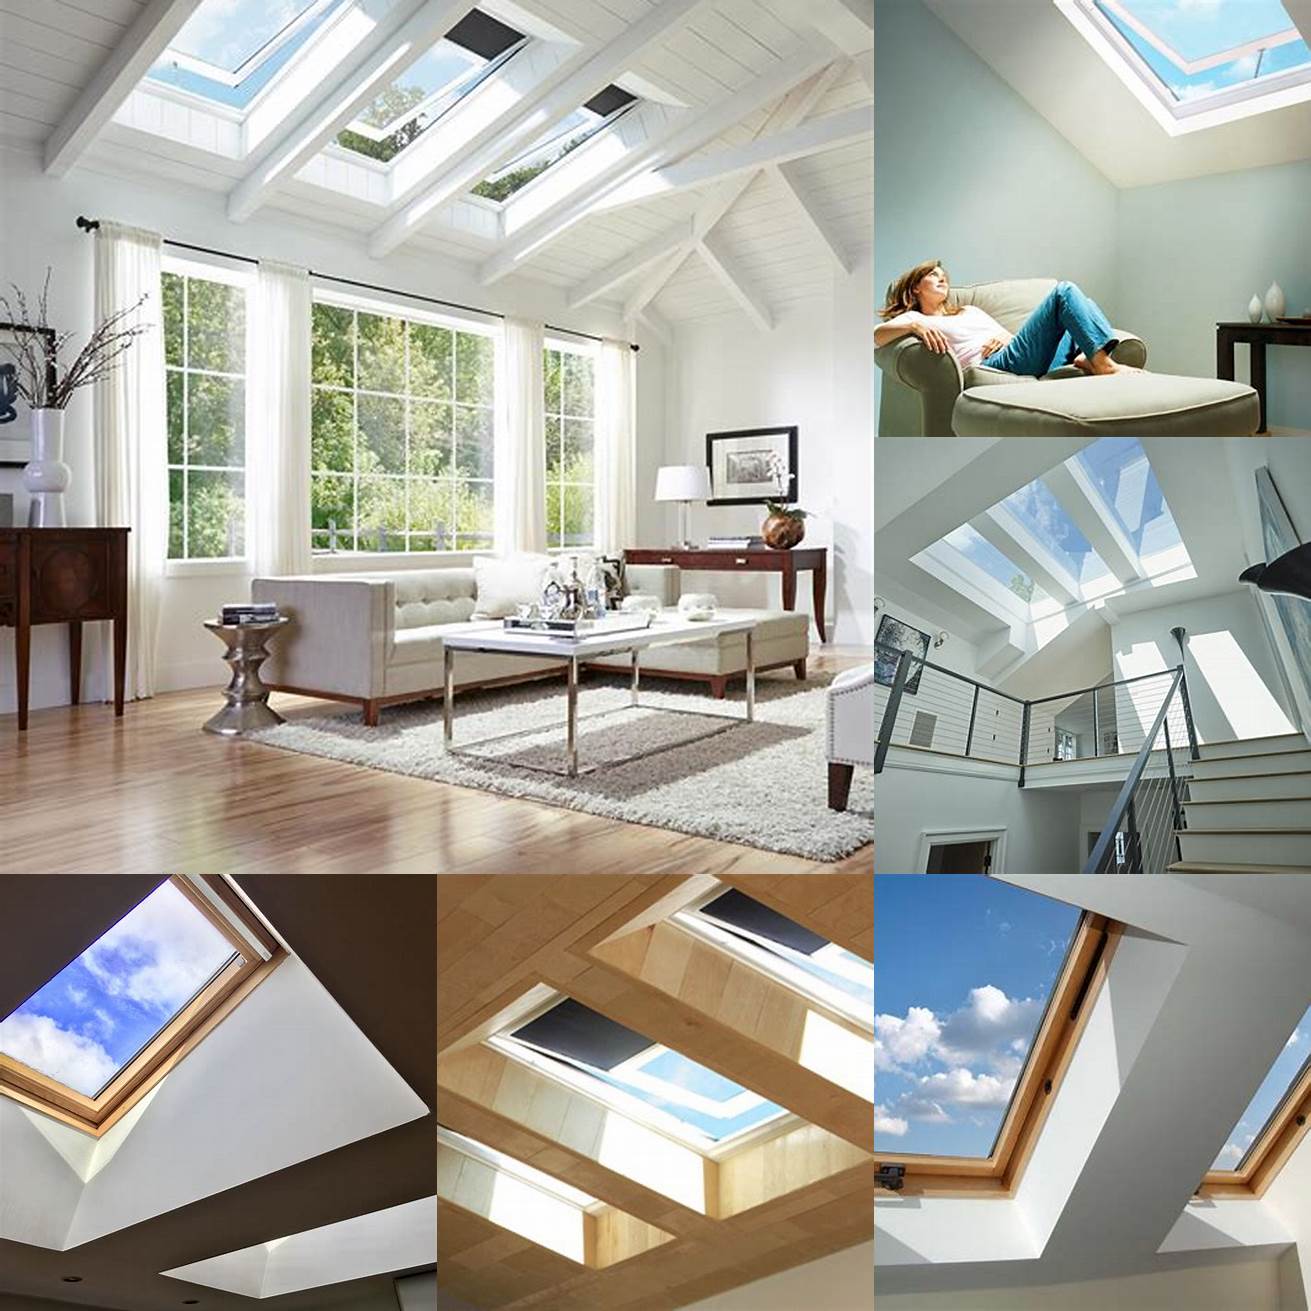 Install skylights to let in more natural light